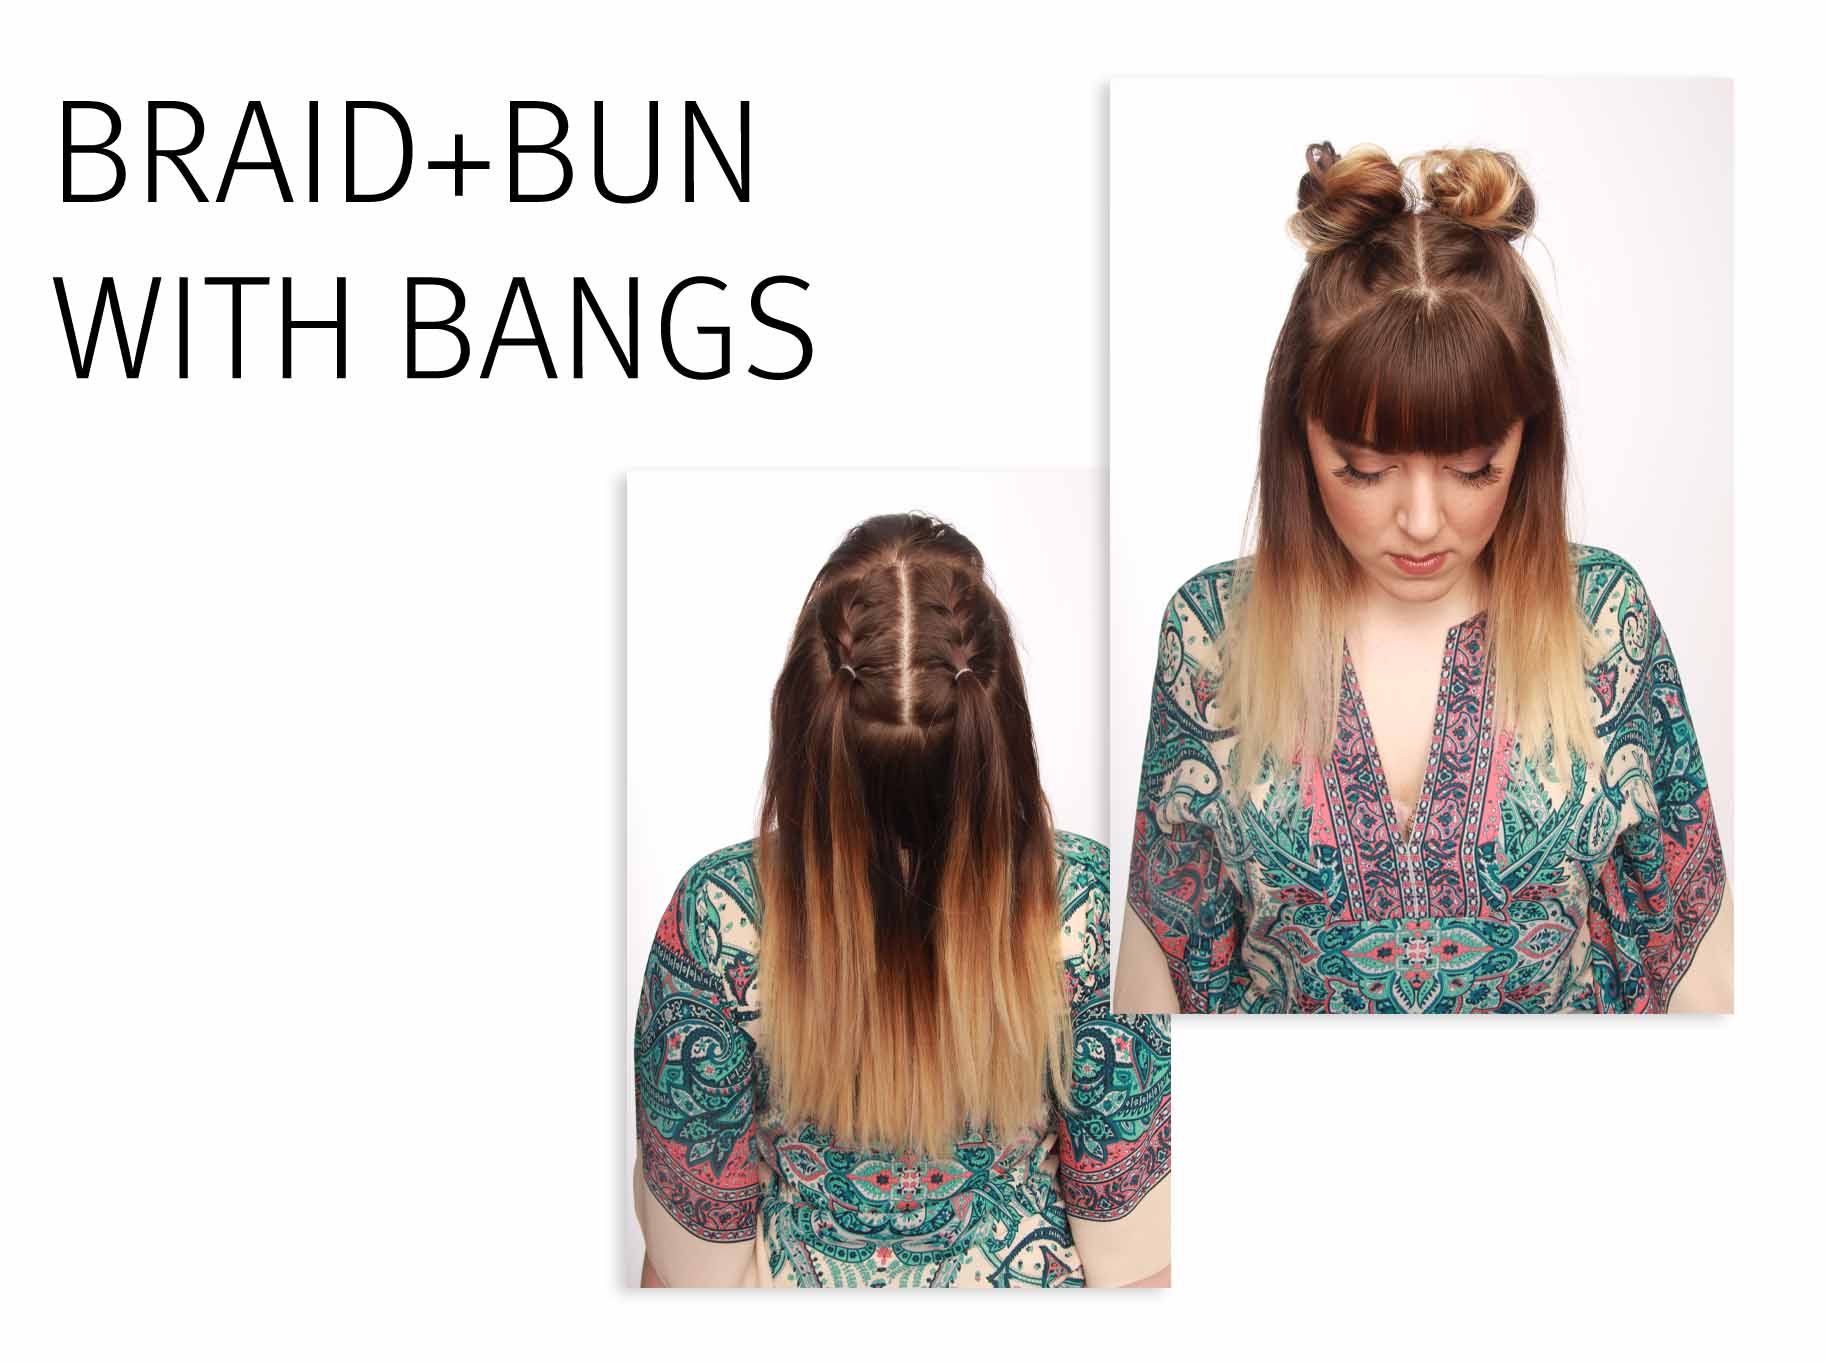 image of braid and bun combo with bangs